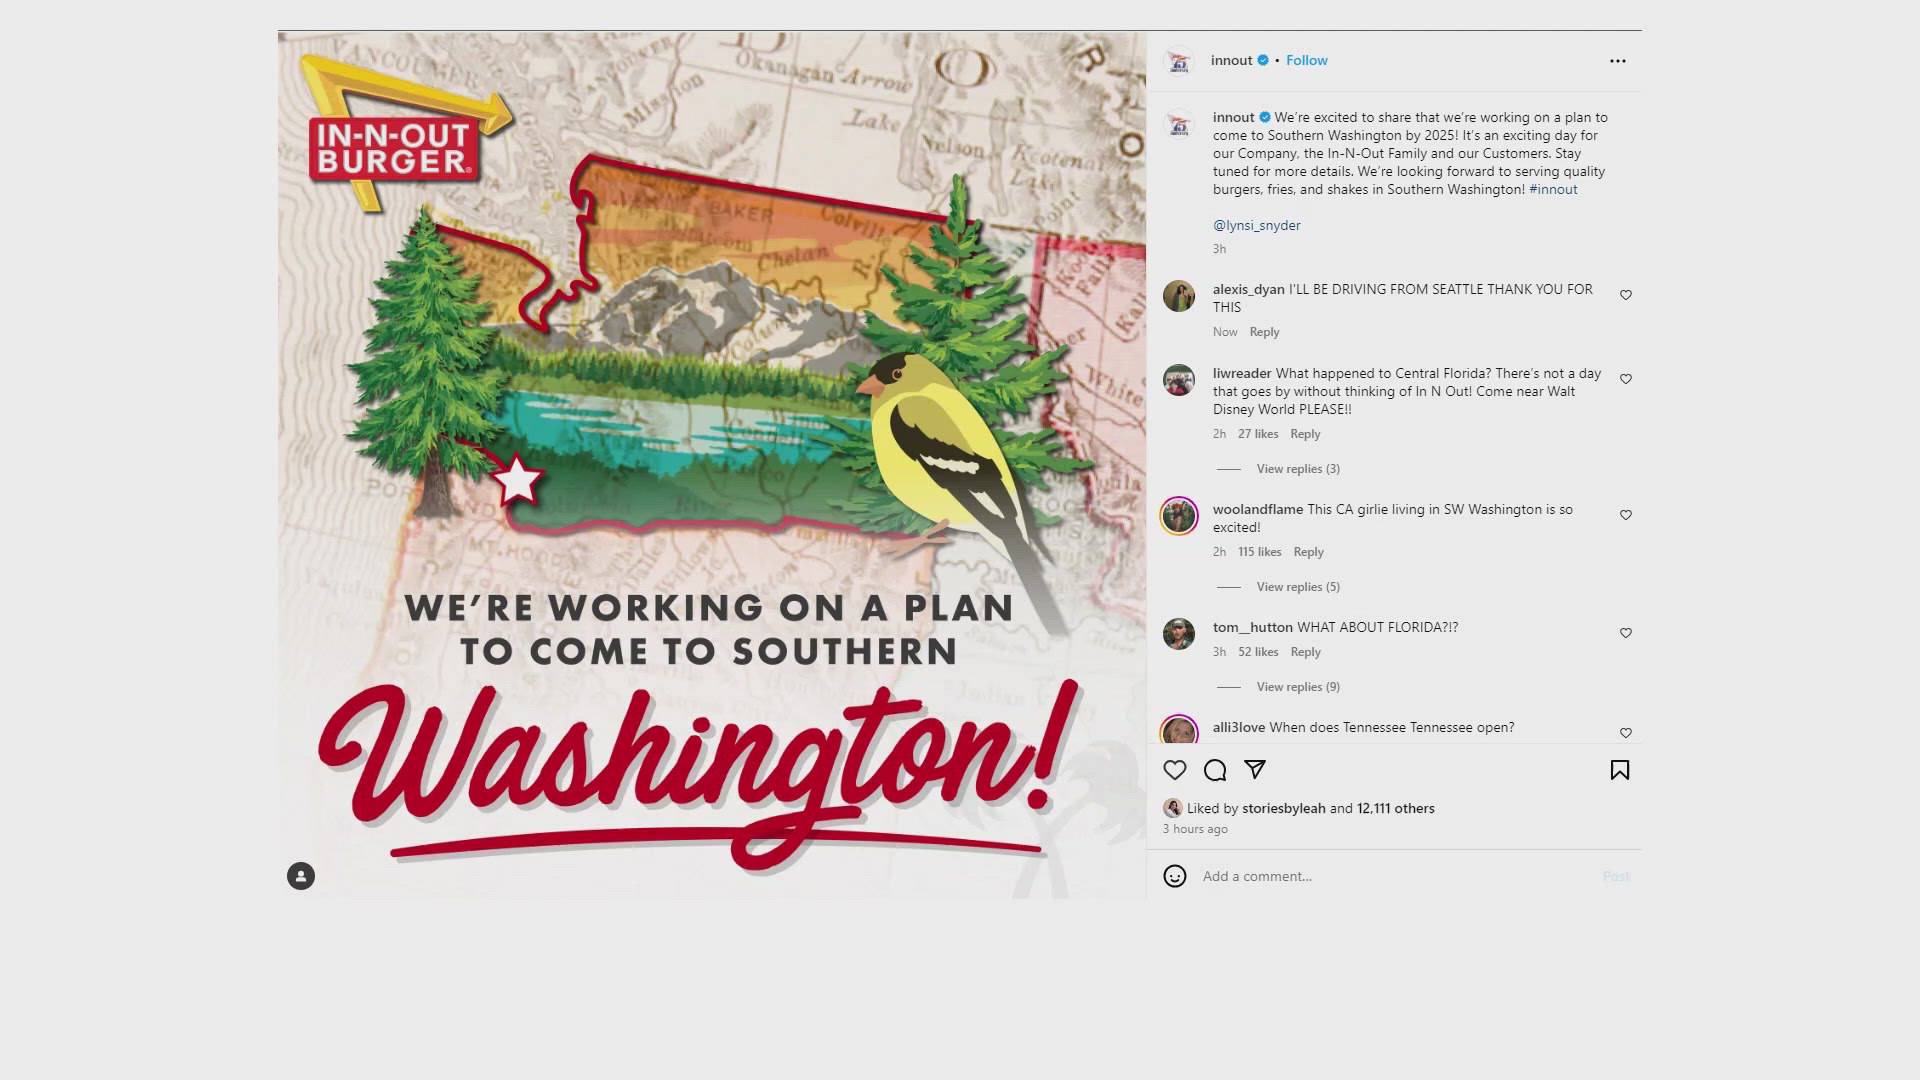 If everything goes as planned, Washington will be home to two of the famous burger joints in Ridgefield and Vancouver.